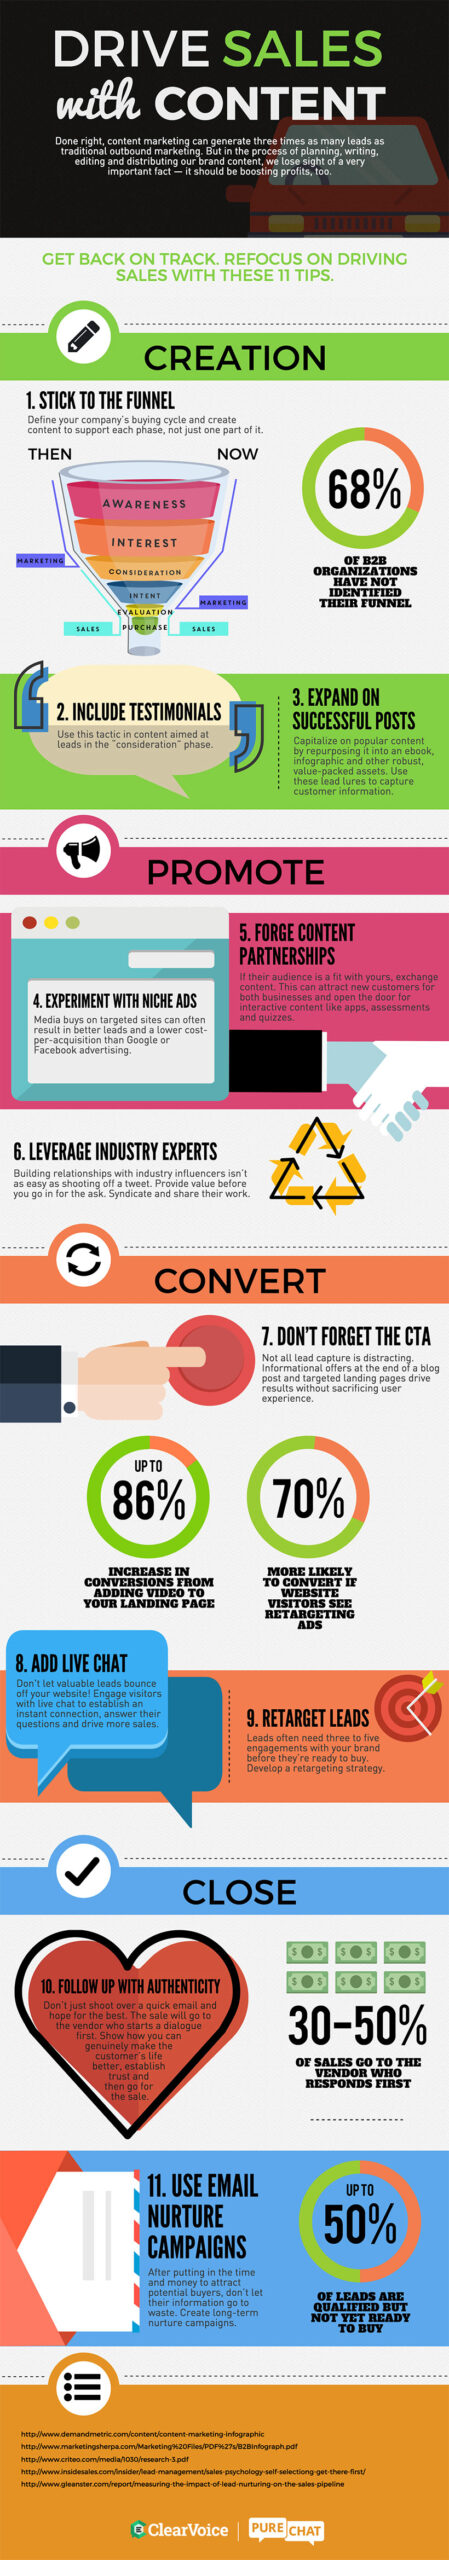 Infographic: Drive Sales Content Marketing